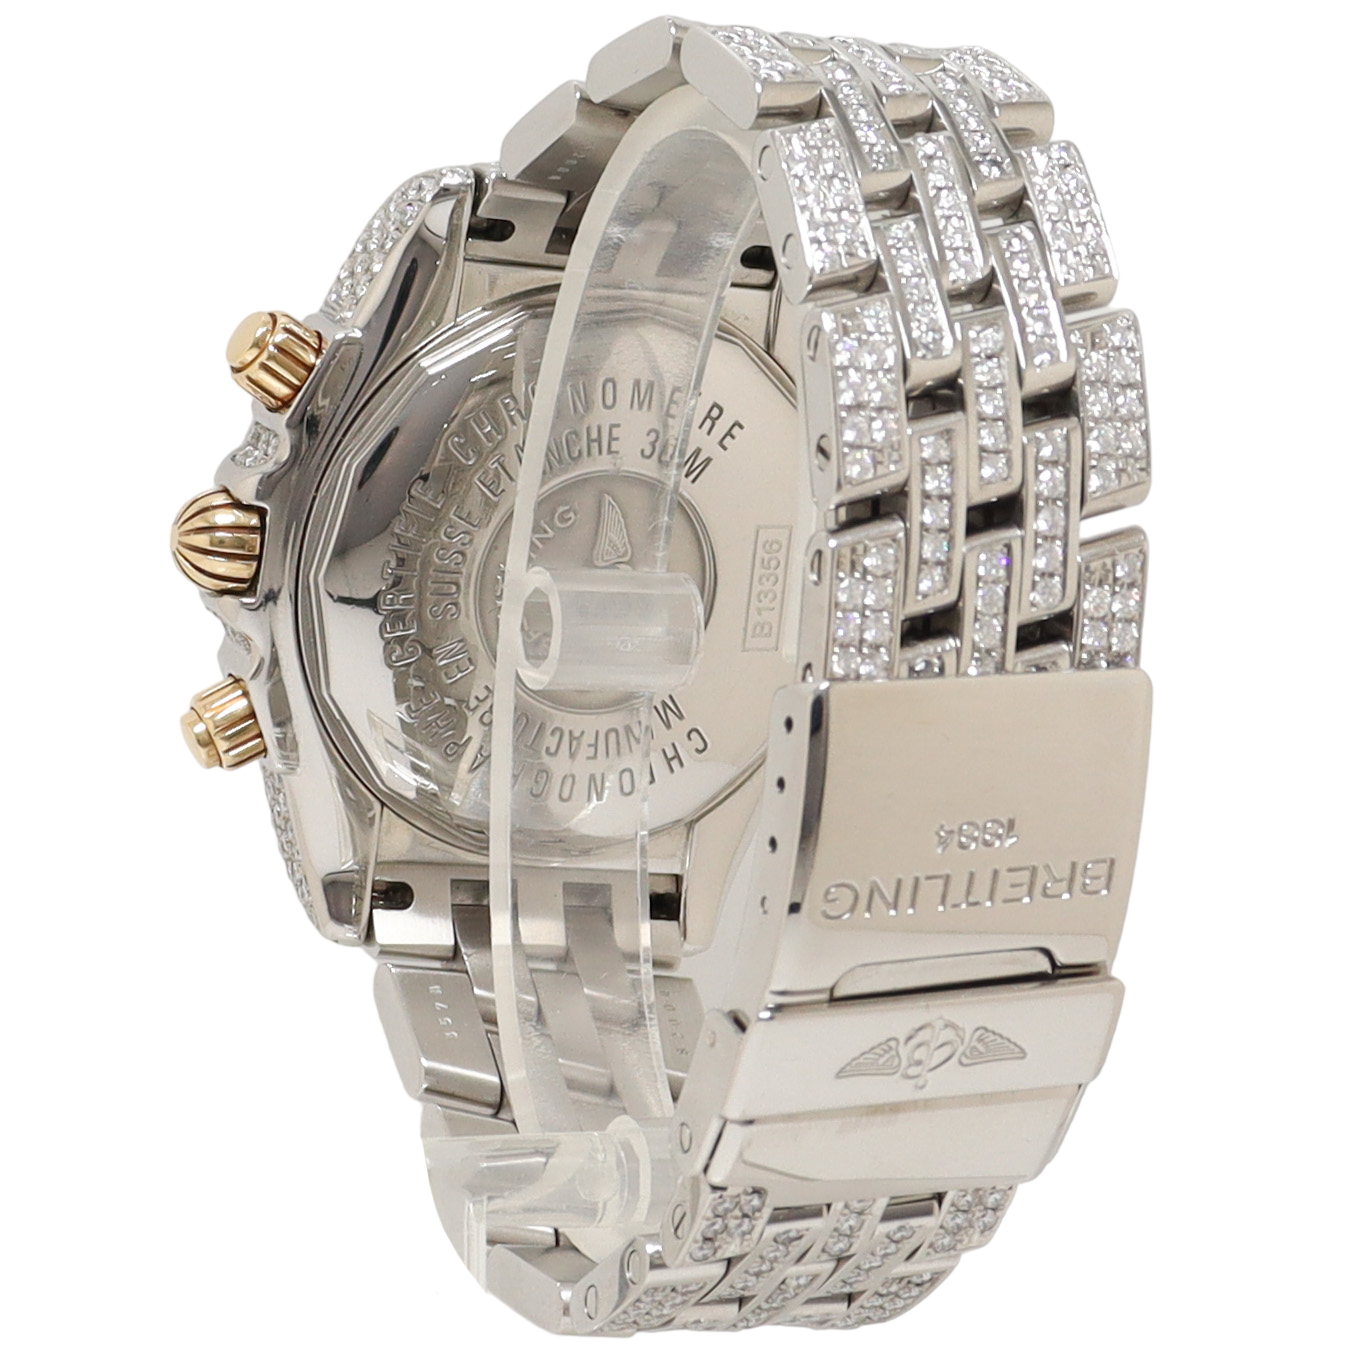 Load image into Gallery viewer, Breitling Evolution Chronomat Diamond Watch with Mother of Pearl Diamond Dial Watch Reference#: B13356 - Happy Jewelers Fine Jewelry Lifetime Warranty
